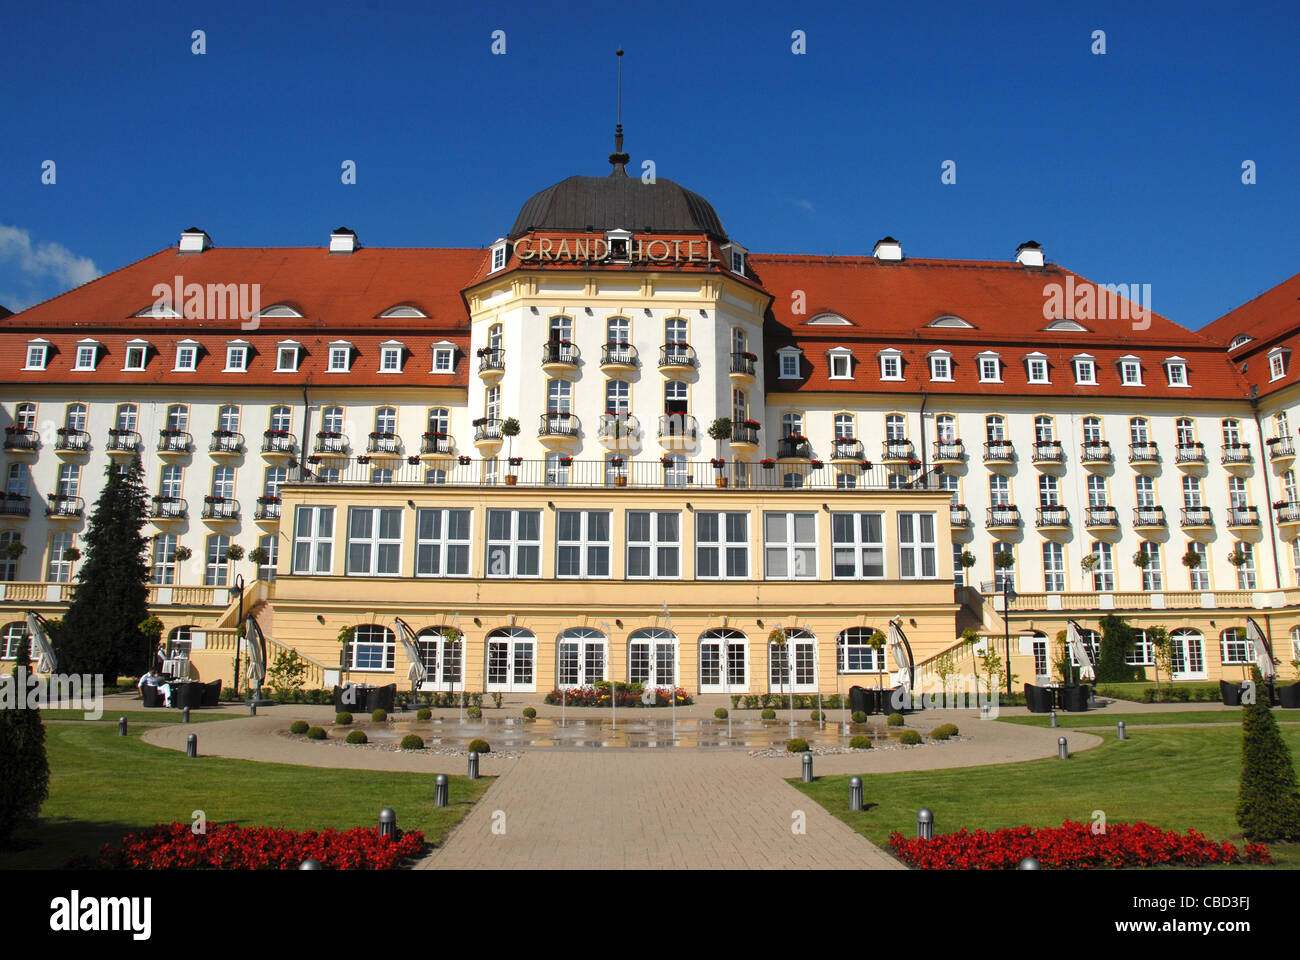 The majestic Grand Hotel at Sopot on the Baltic Sea coast near Gdansk seen from the beach and park side Stock Photo